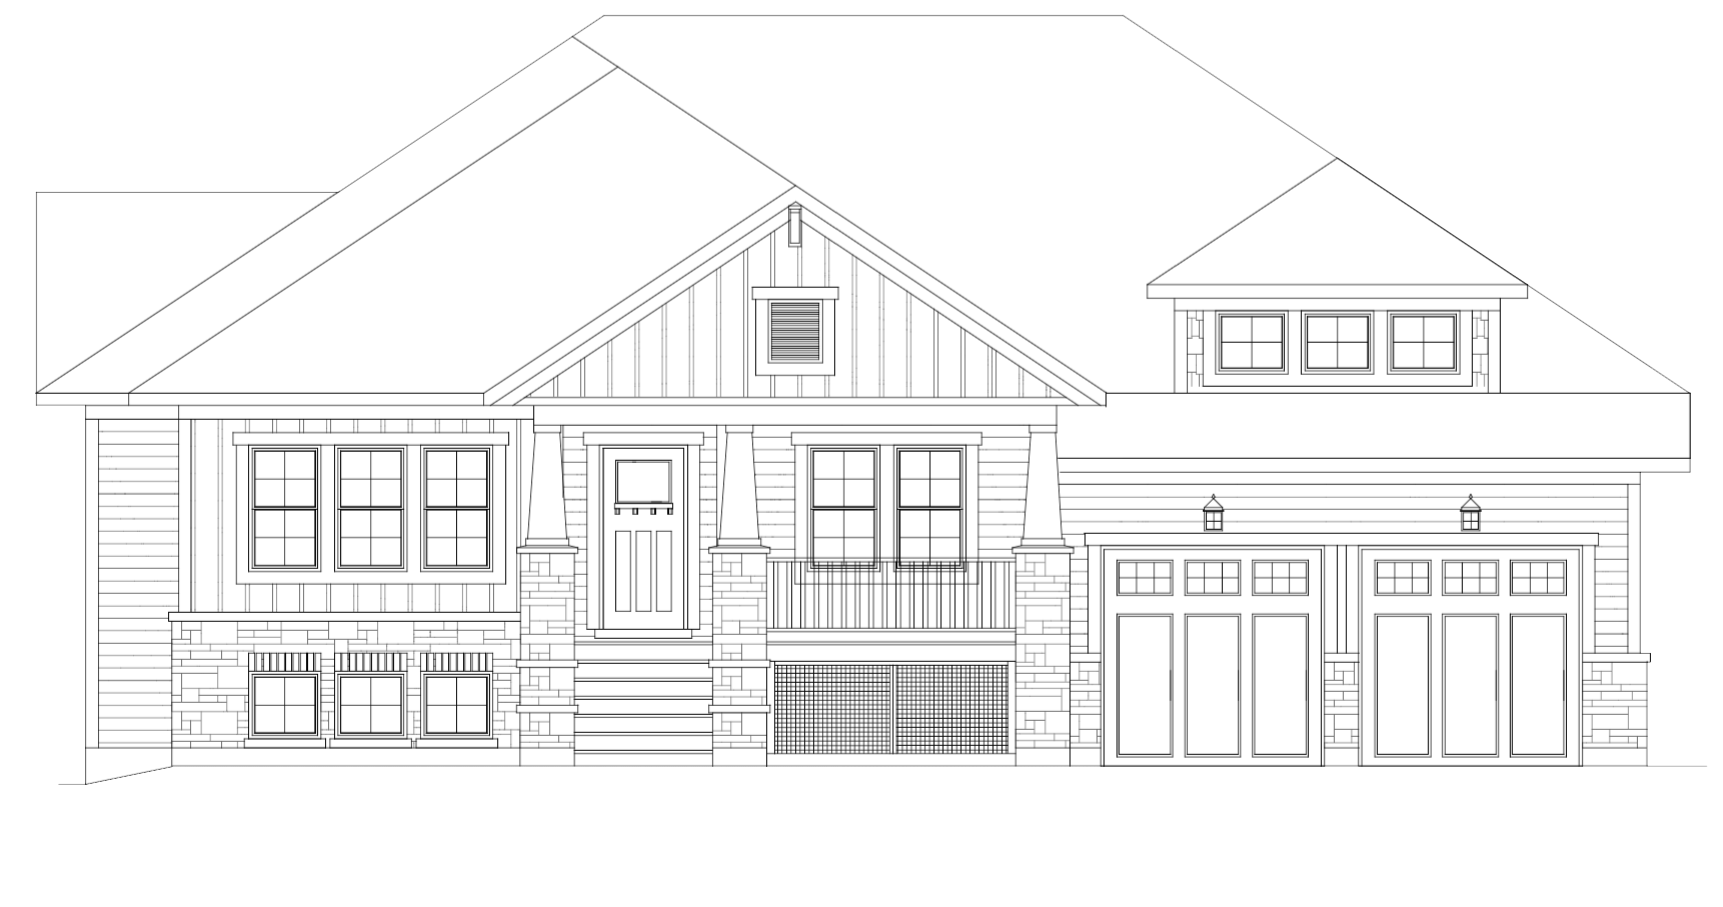 Front elevation plan of Collingwood Craftsman Home by Baric